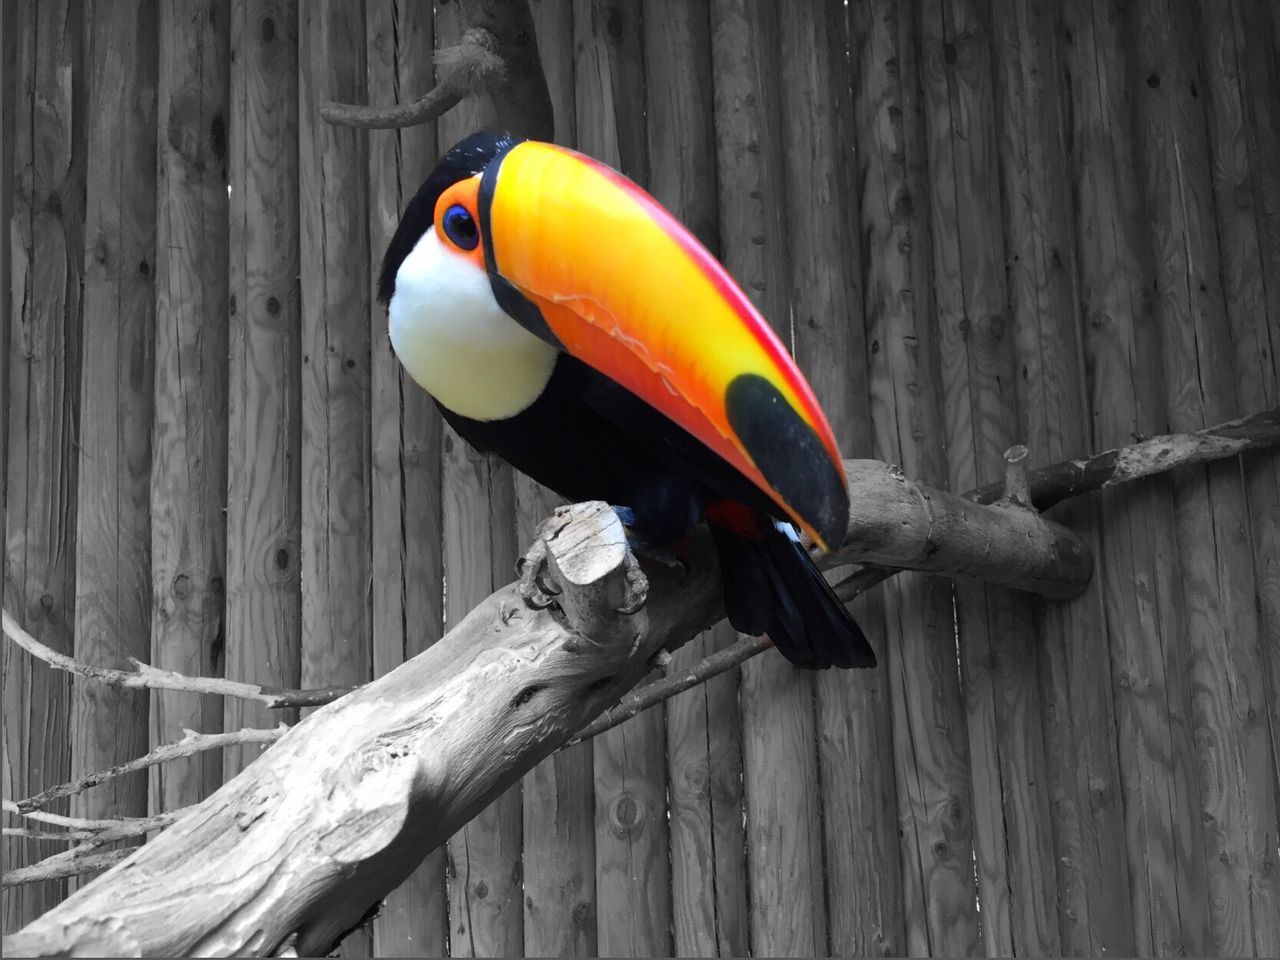 CLOSE-UP OF PARROT PERCHING ON WOODEN WOOD